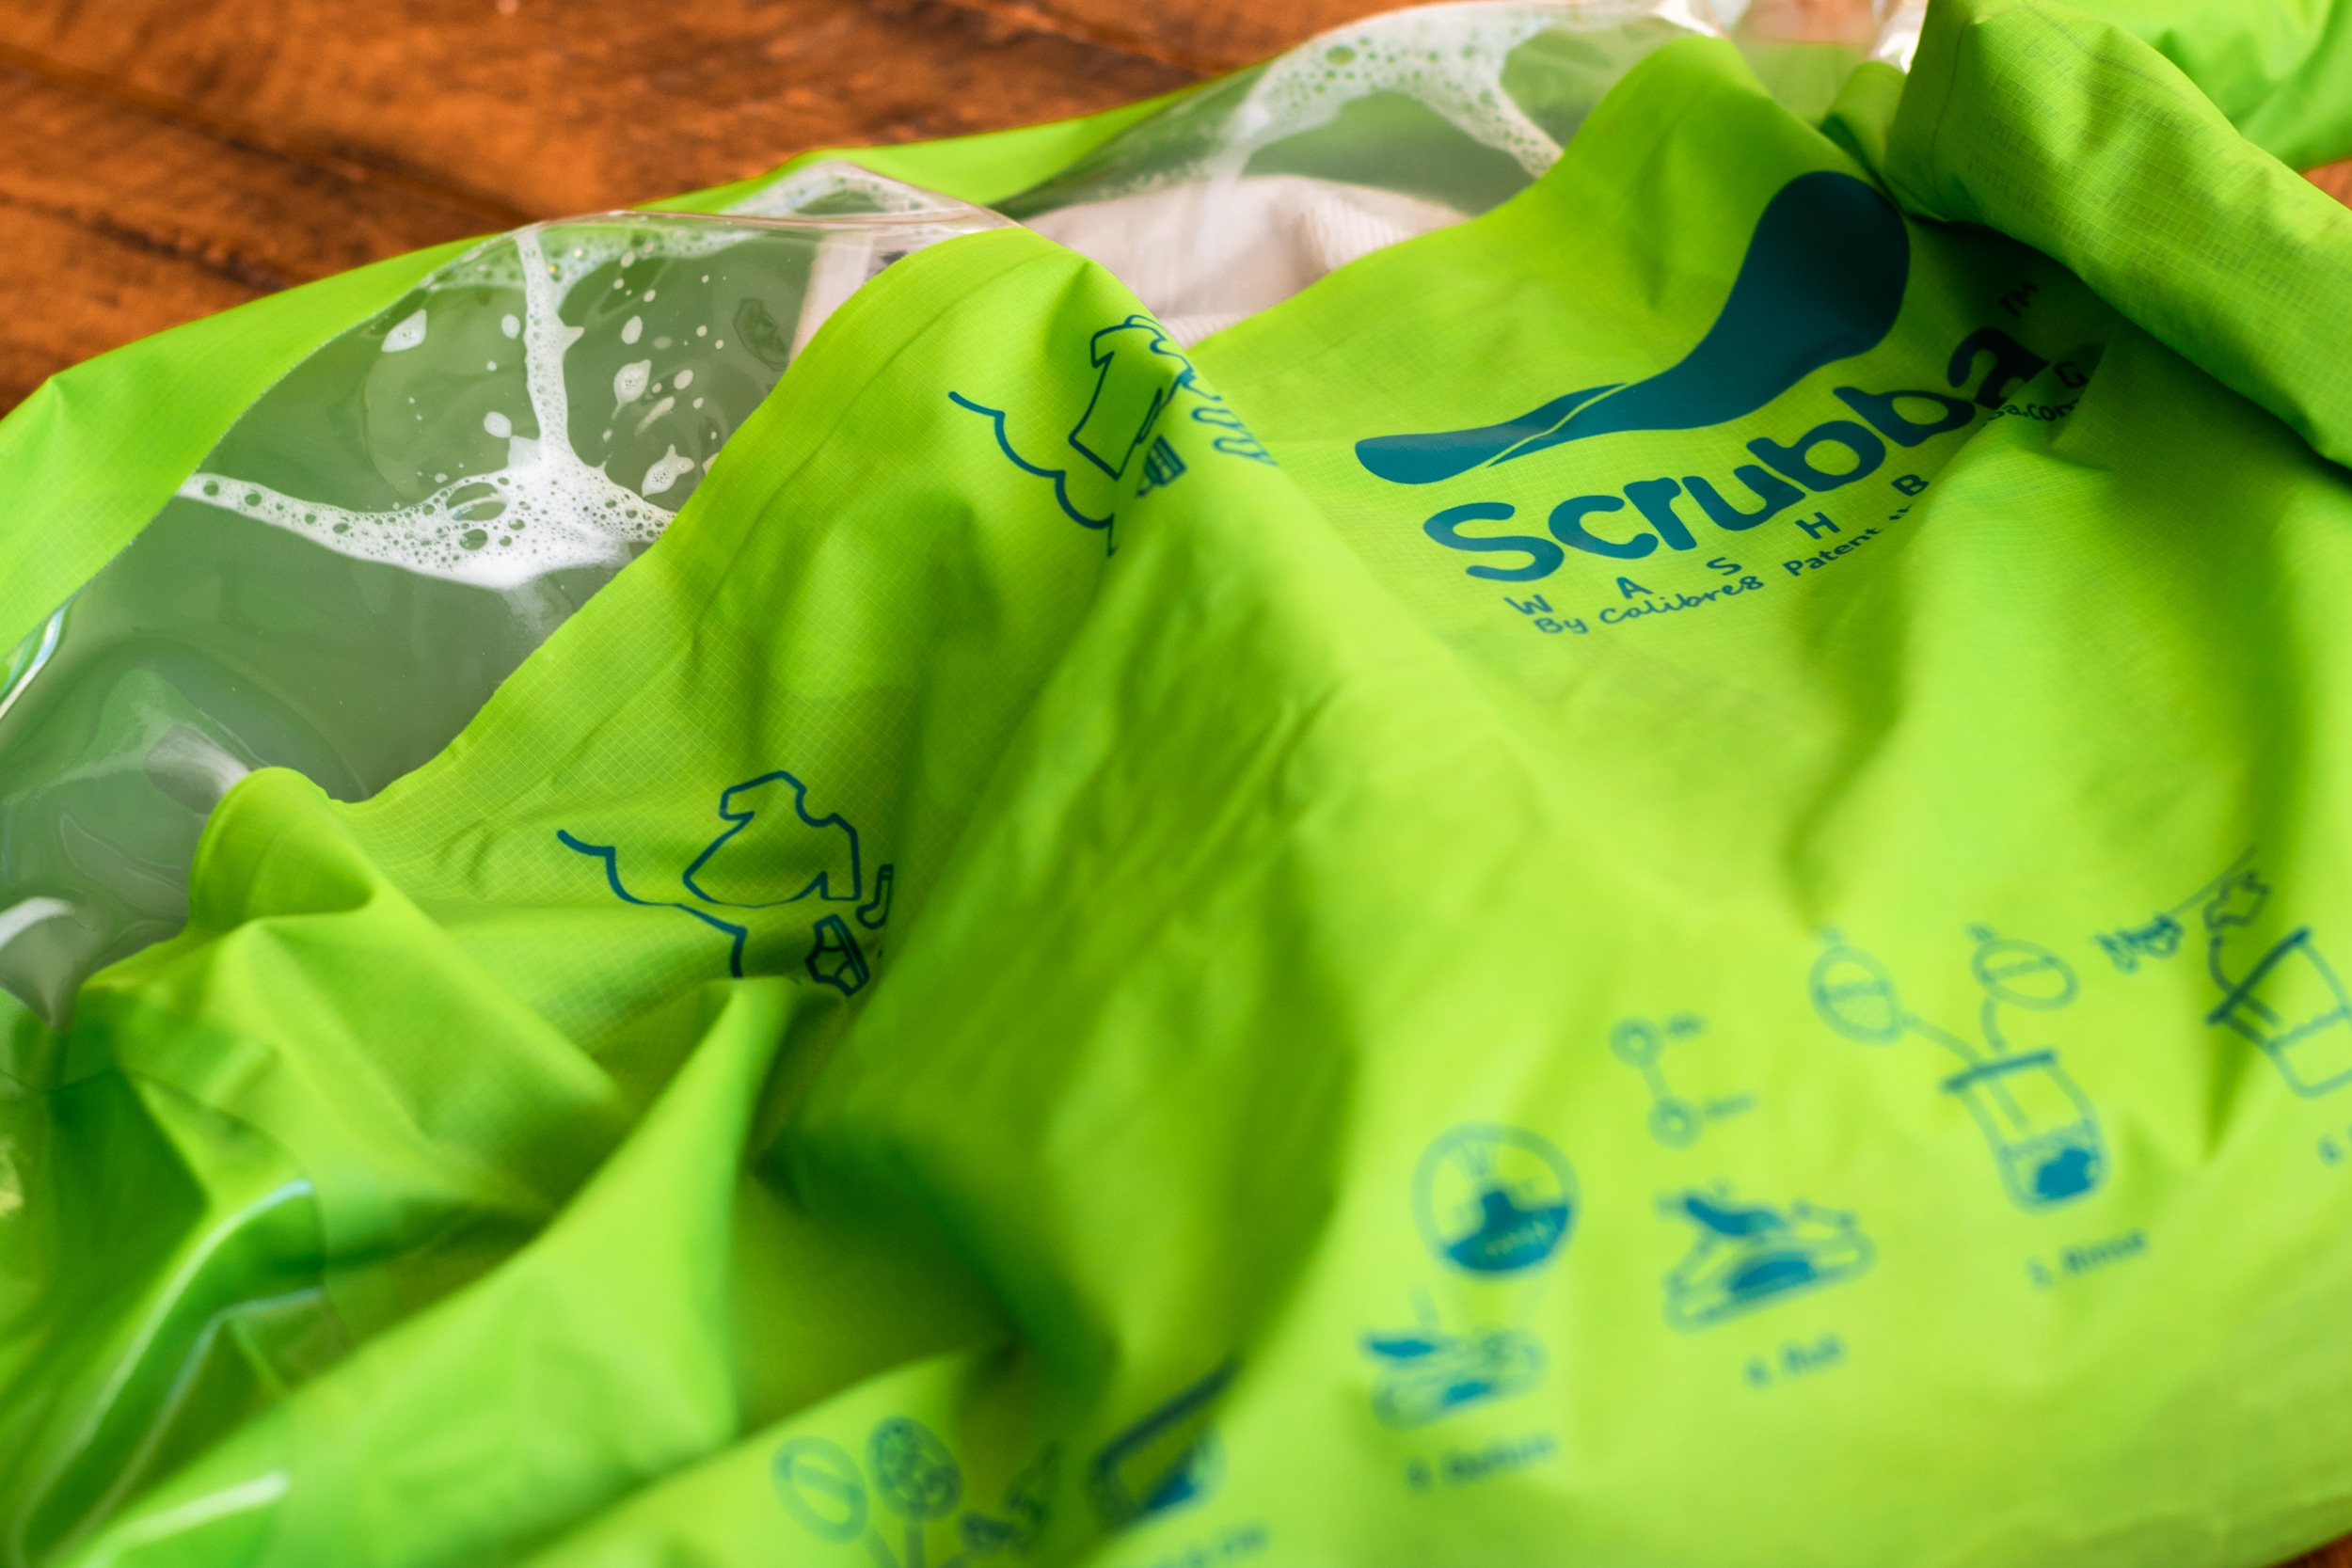 Scrubba wash bag with soapy water inside.